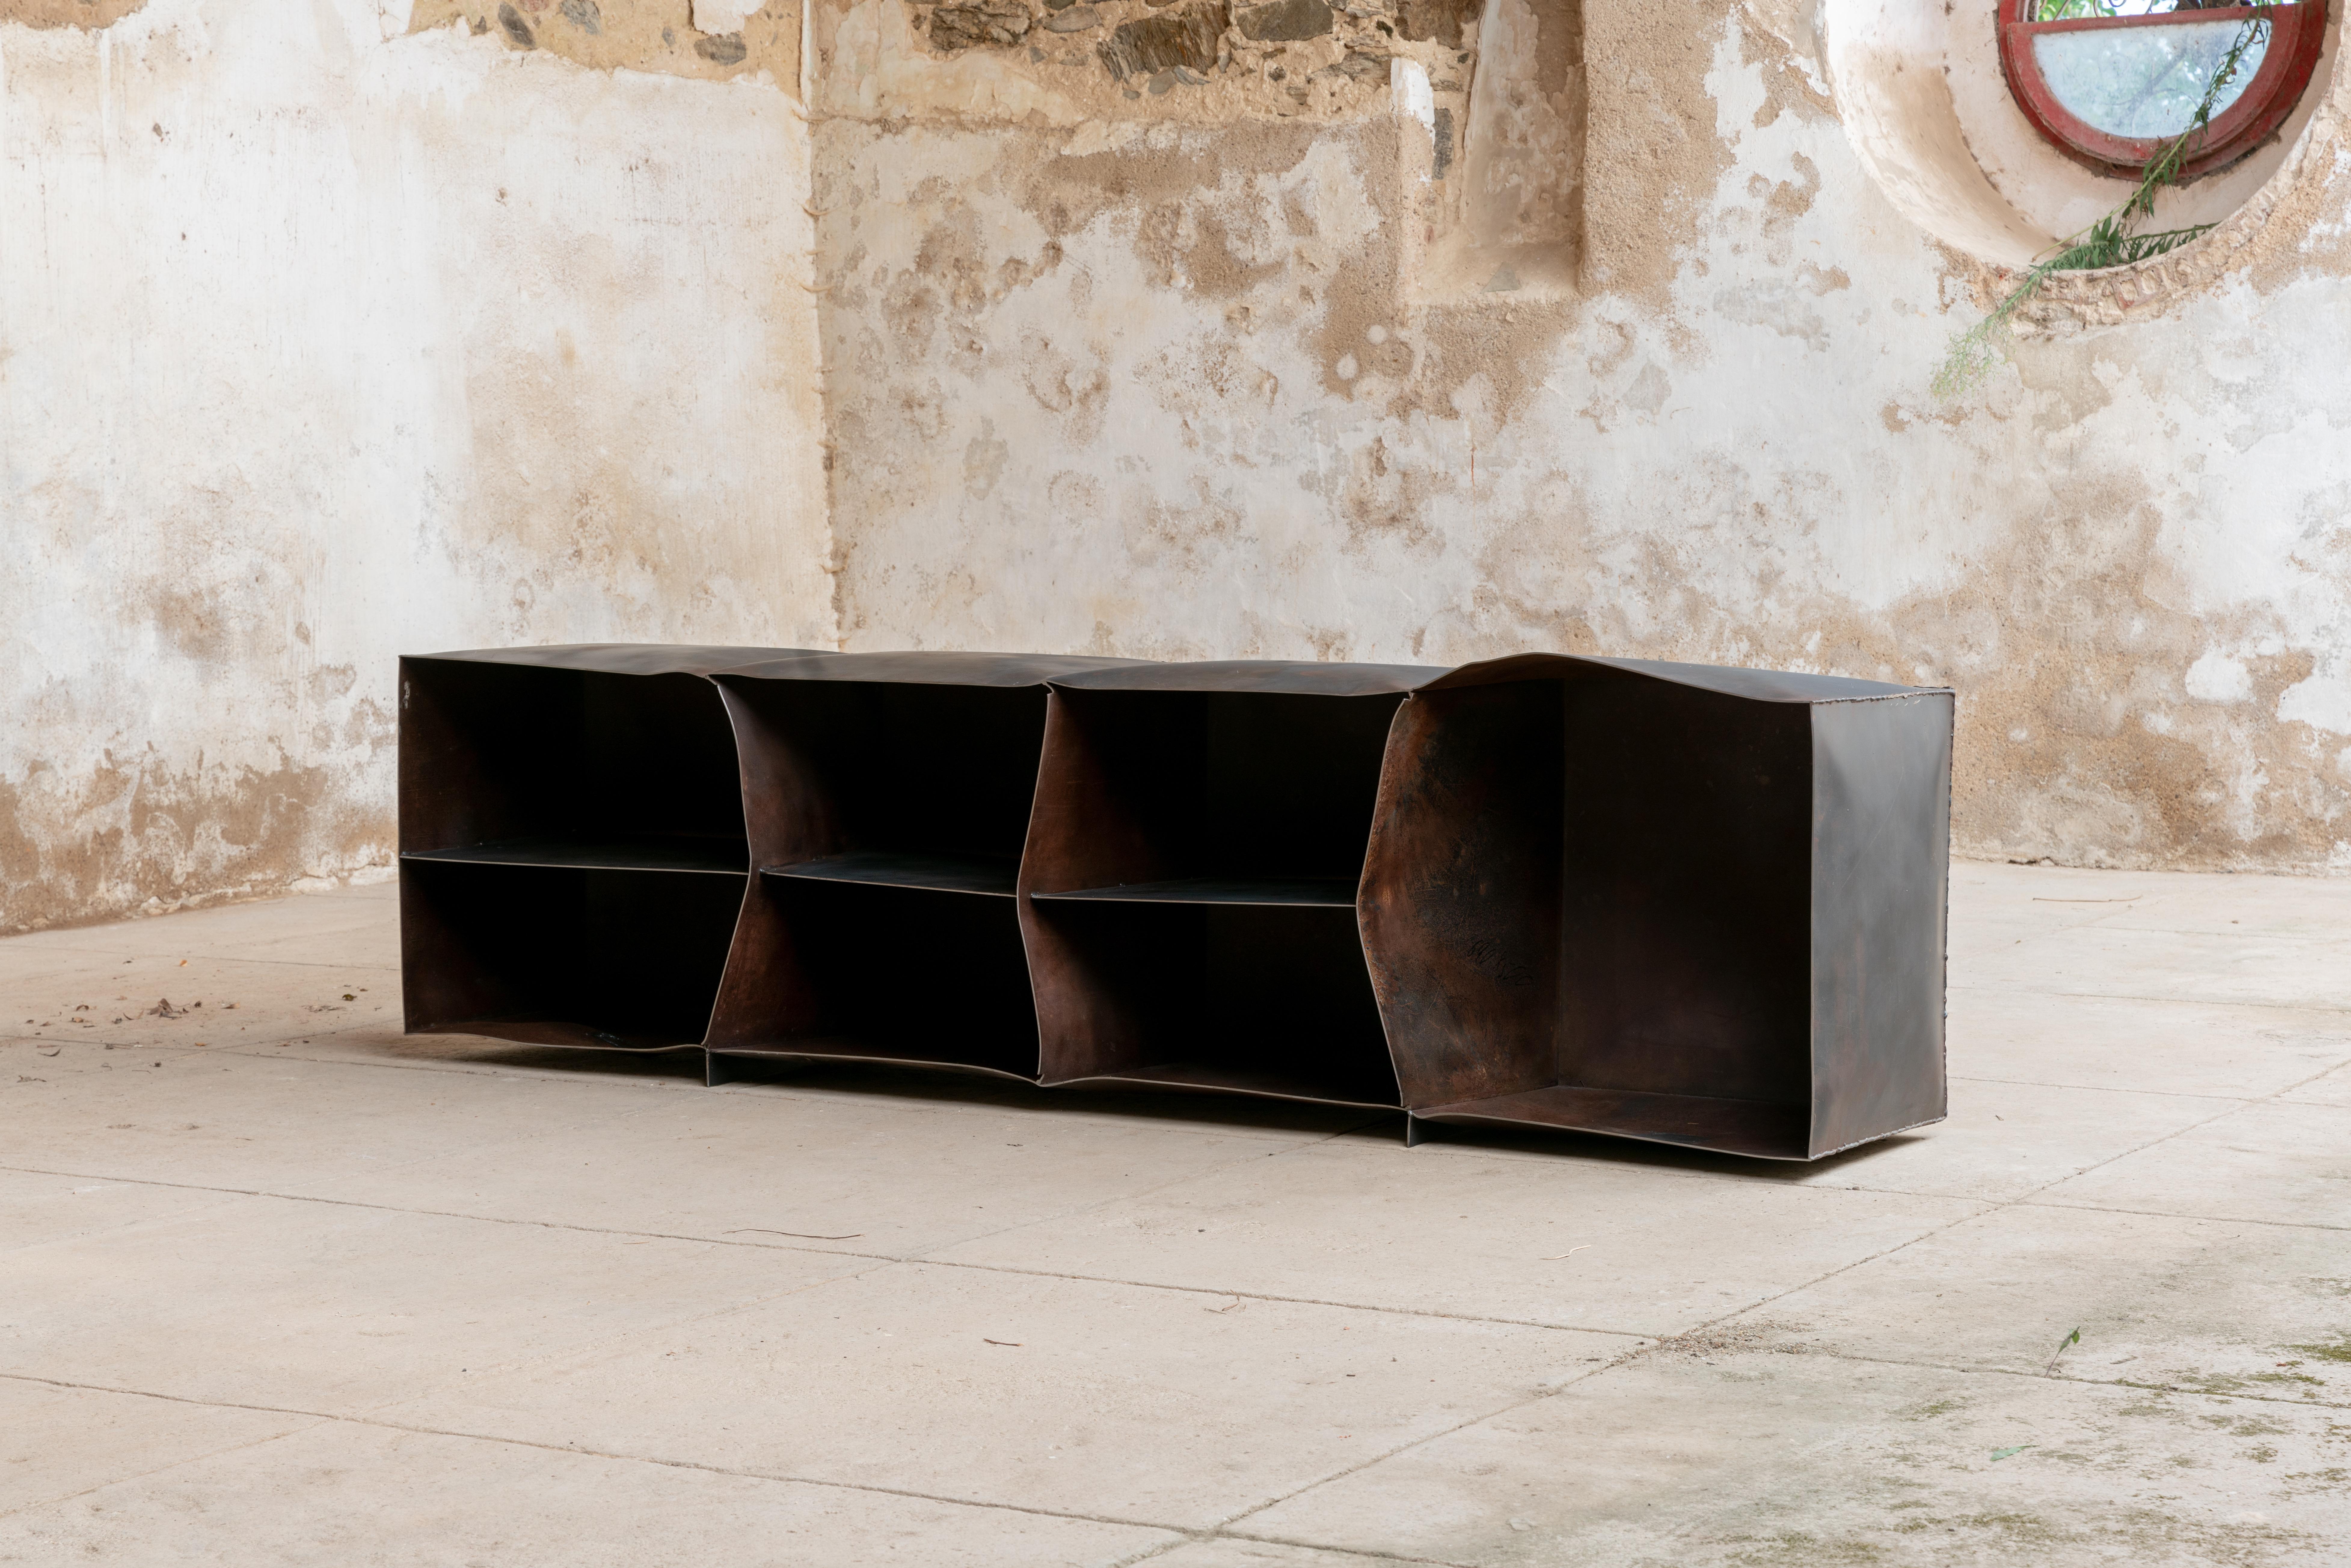 One-of-a-kind Sideboard.

The object is made from a Metal Volume that has been spontaneously shaped by an explosion, and hand treated to reach a soft touch. Part of a series of three furniture pieces, Metal Volumes have been exploded at various